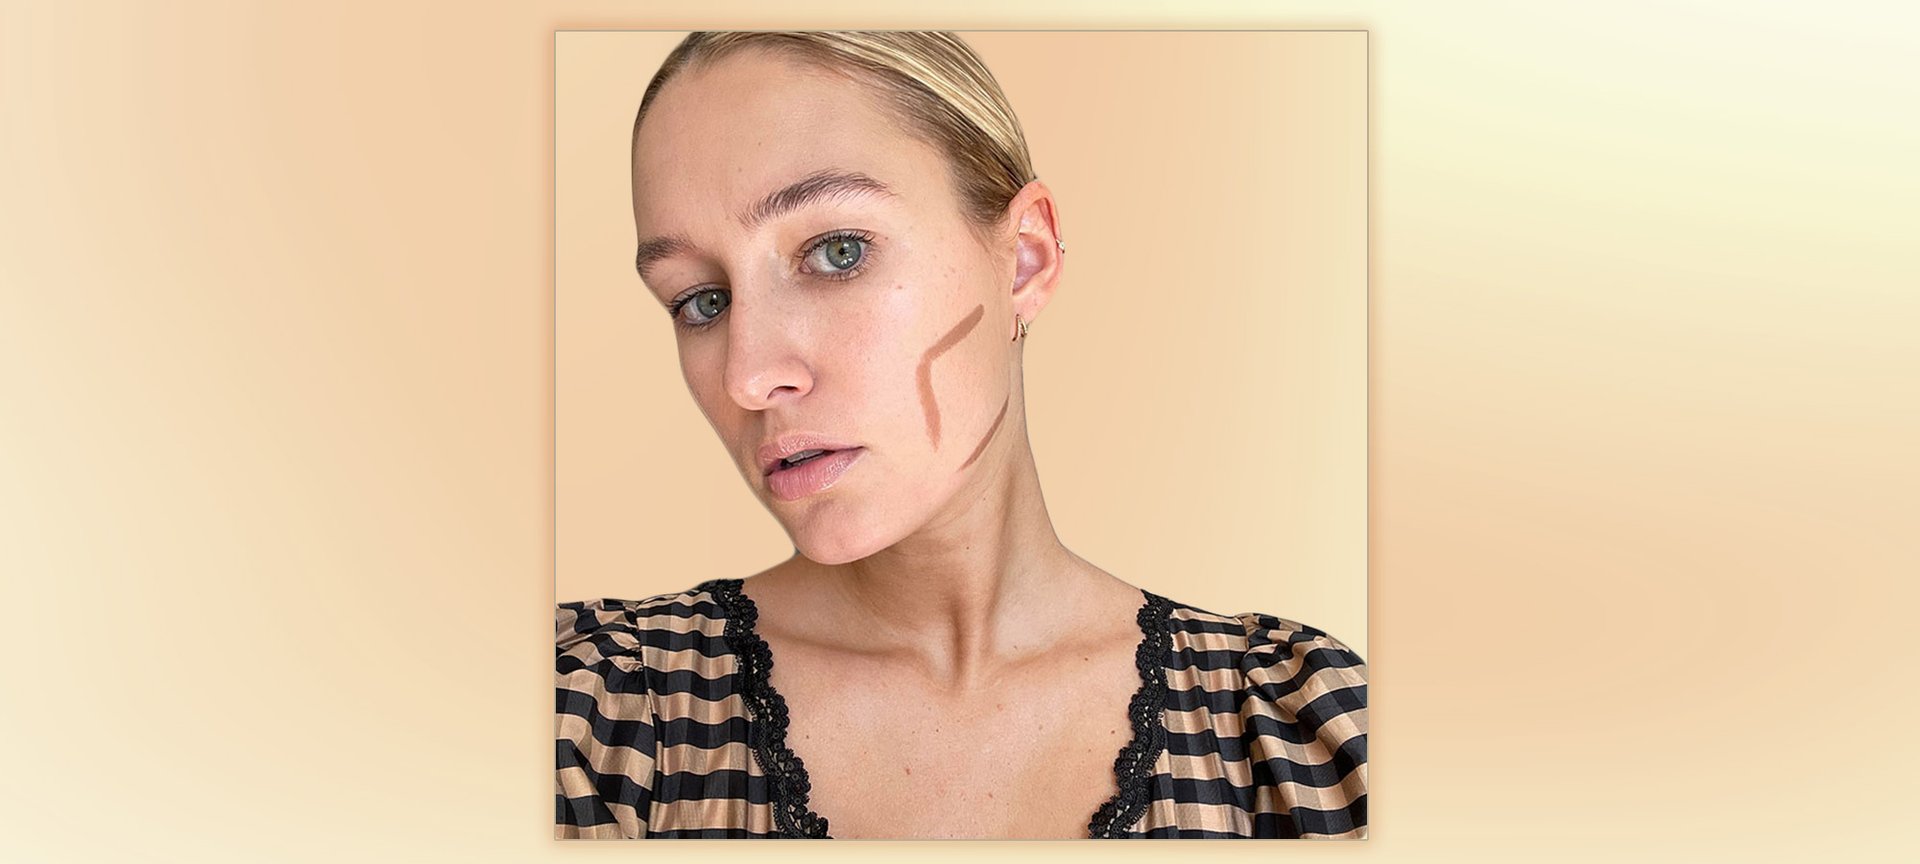 How To: Contour and Highlight Your Face With Makeup